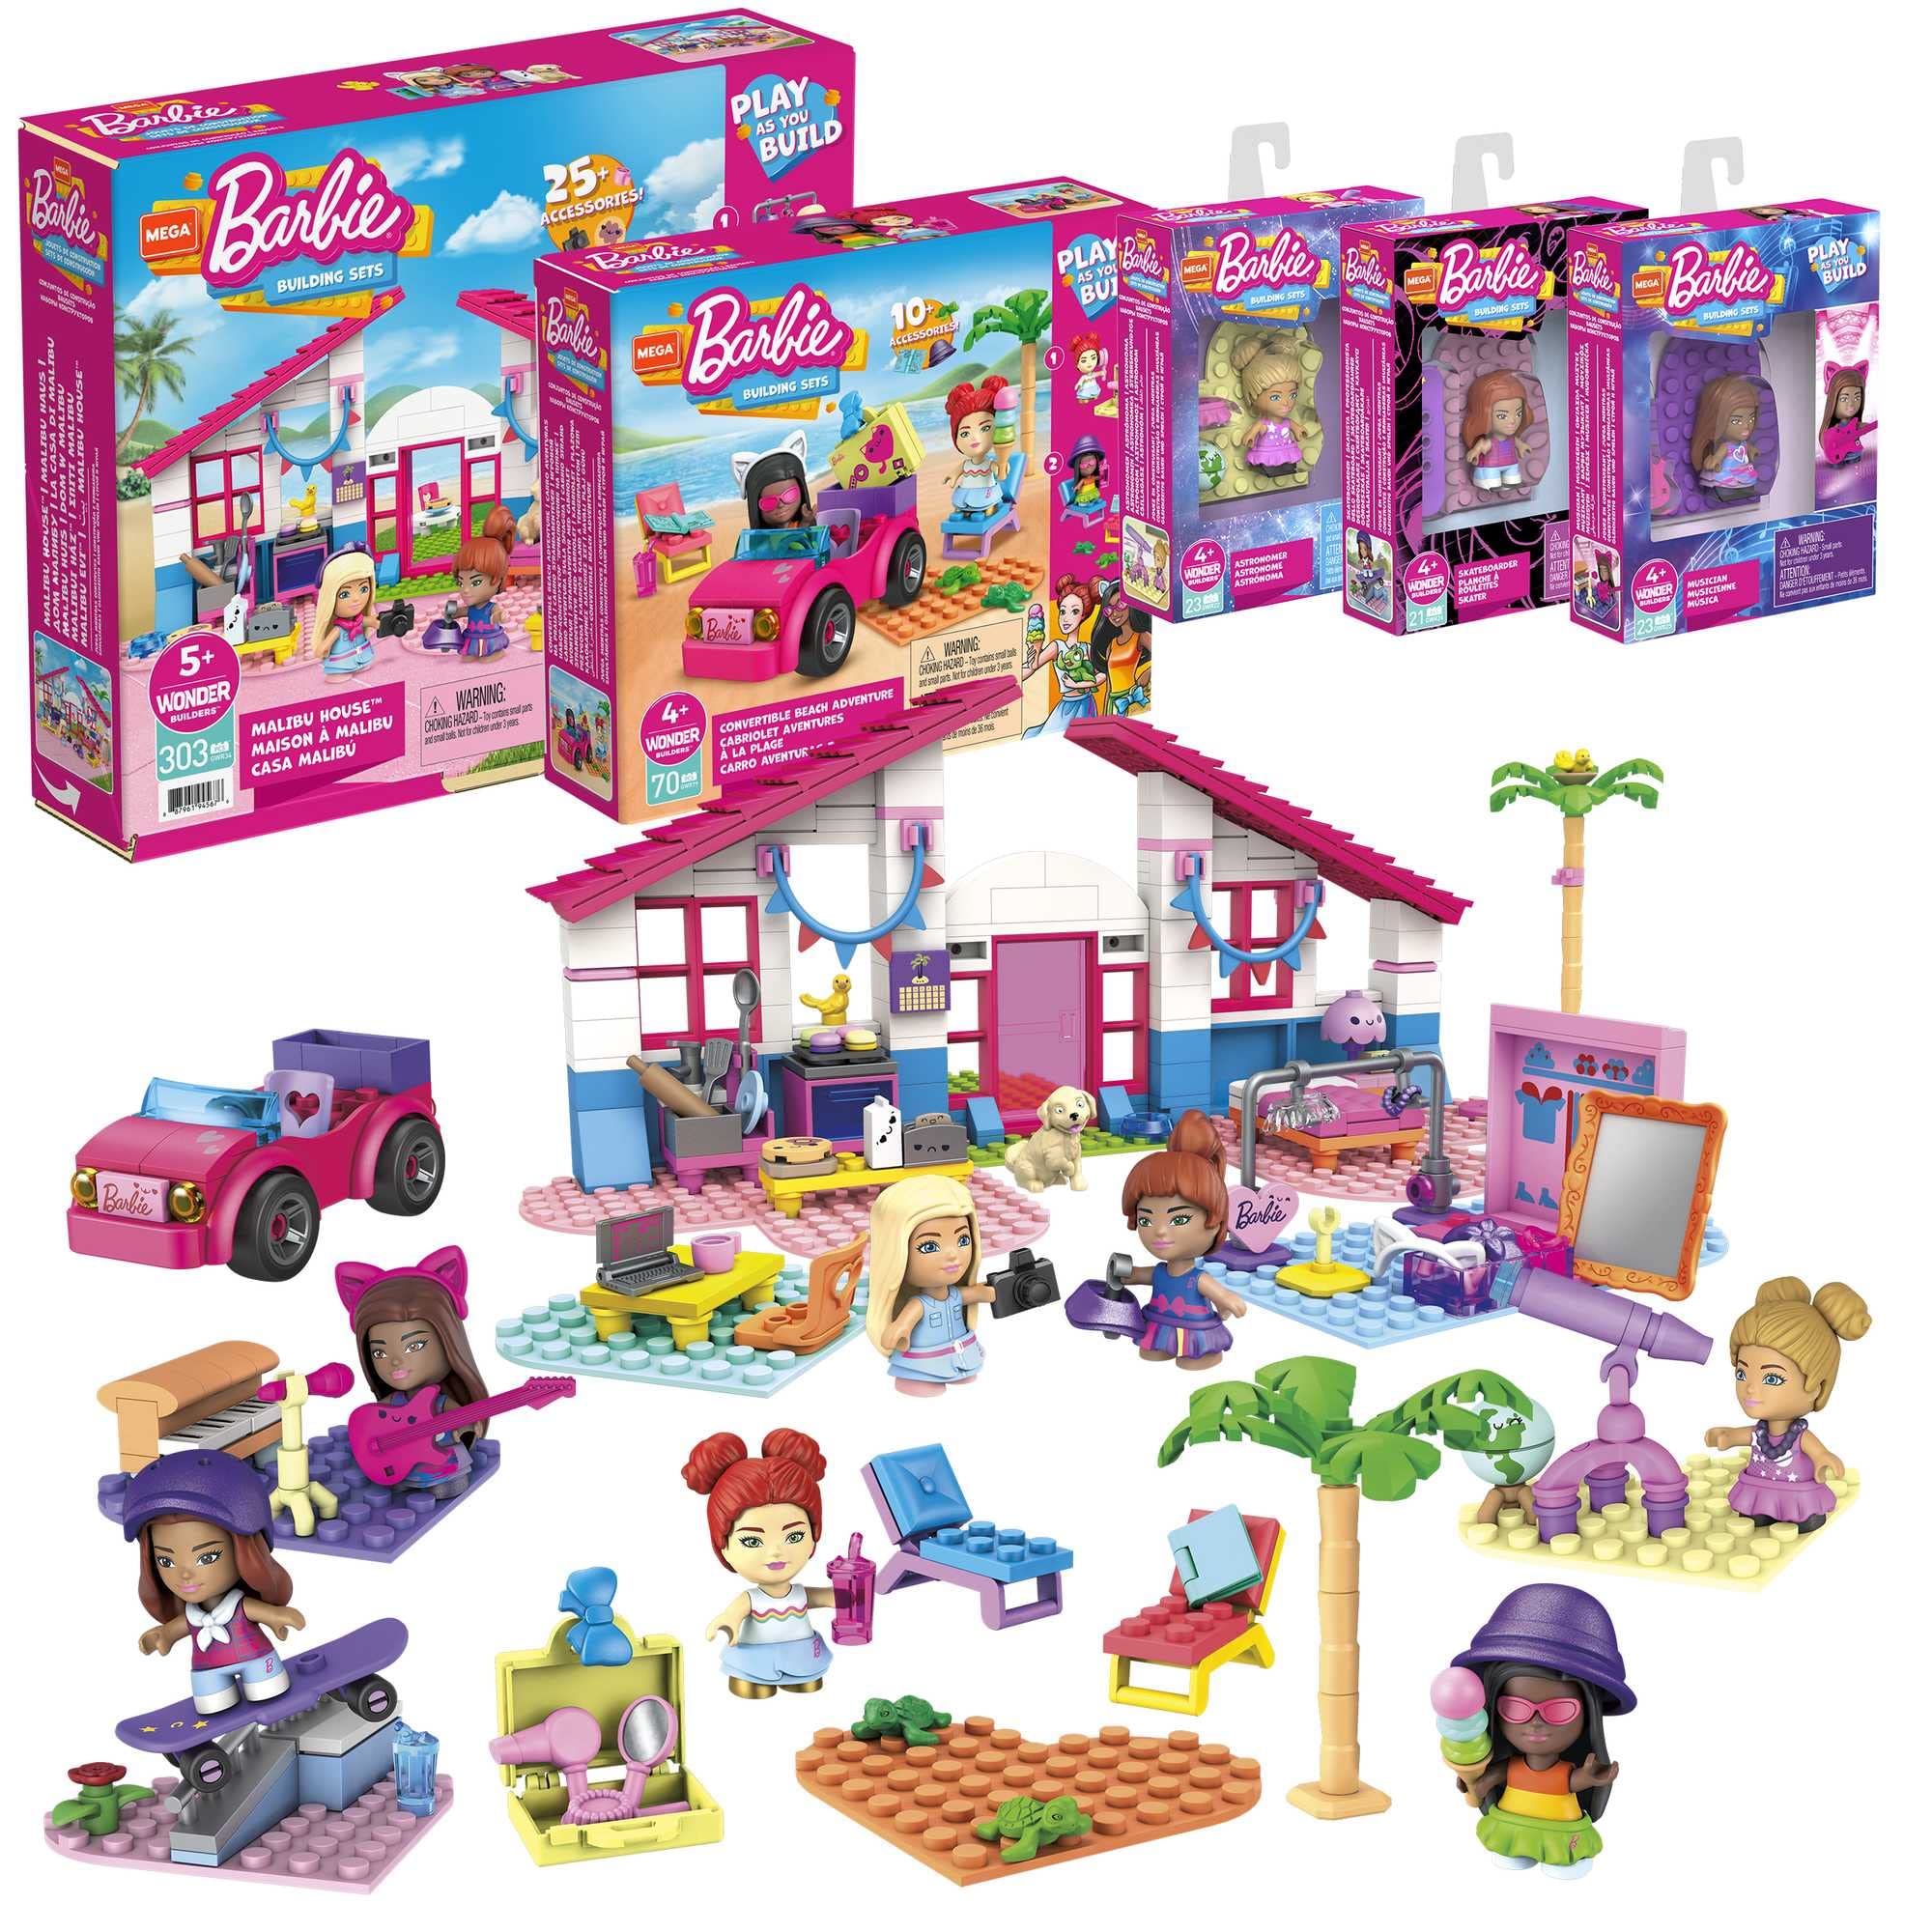 Mega Barbie Malibu Building Sets Bundle, 440 Bricks and Pieces with Fashion and Roleplay Accessories, 7 Micro-Dolls, 1 Puppy, 2 Birds and 2 Turtles, Toy Gift Set for Ages 4 and up